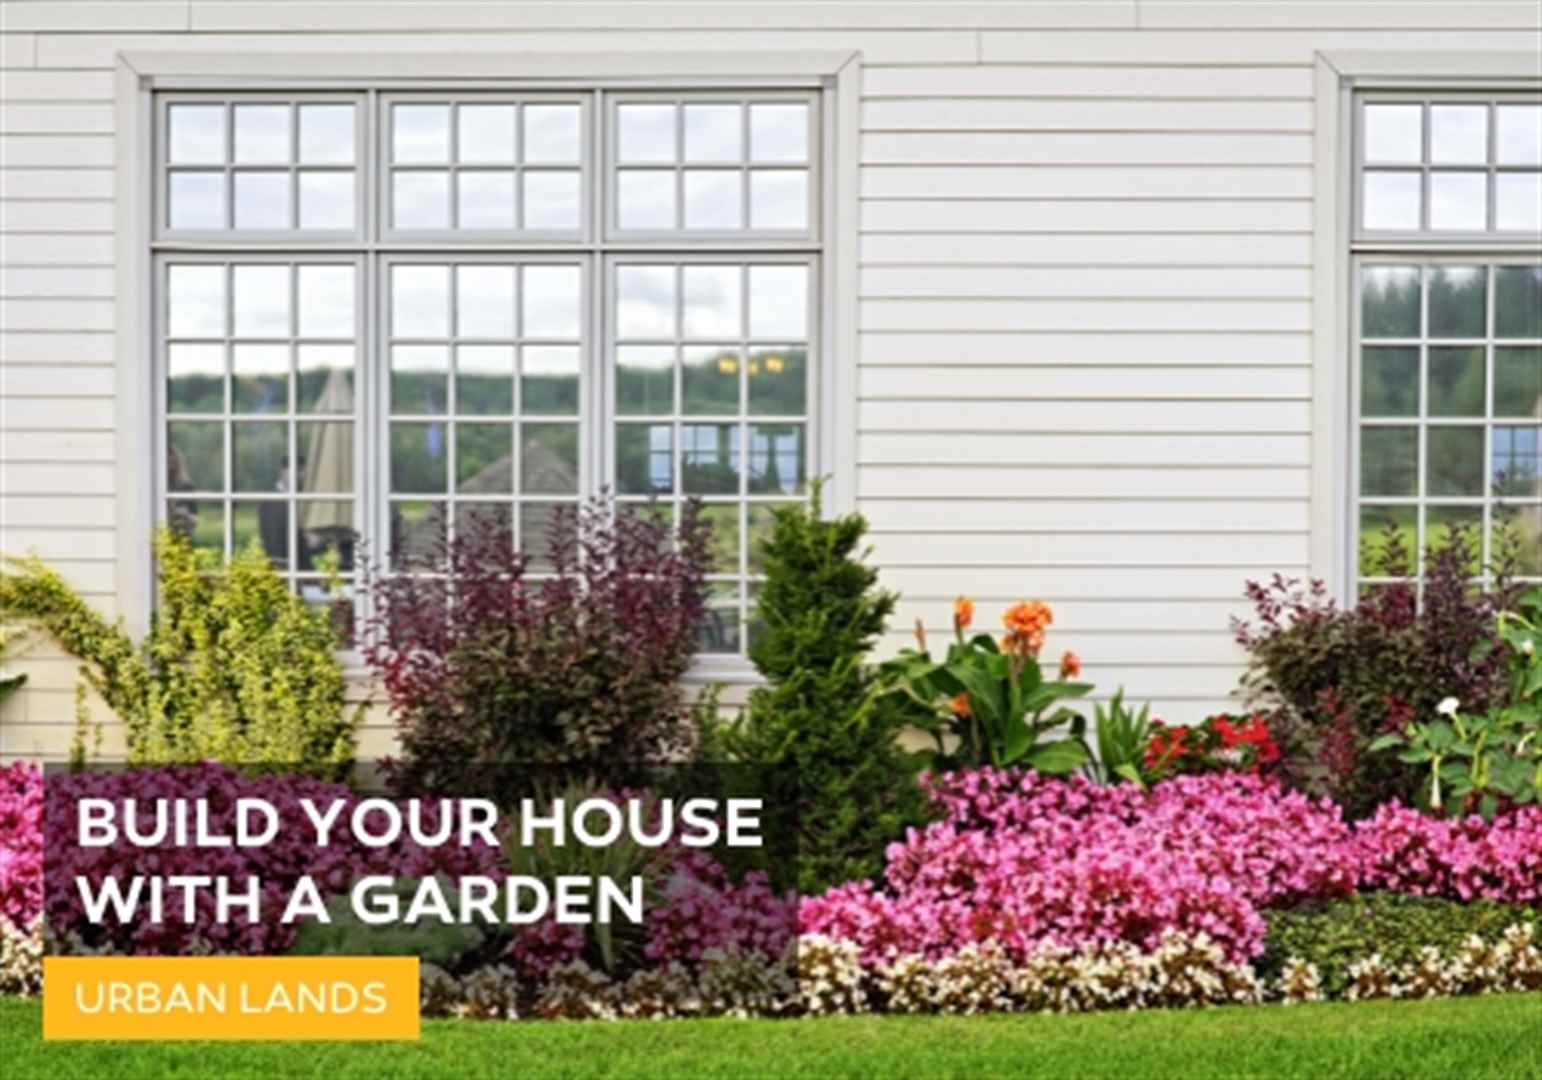 Build your house with garden | Urban lands